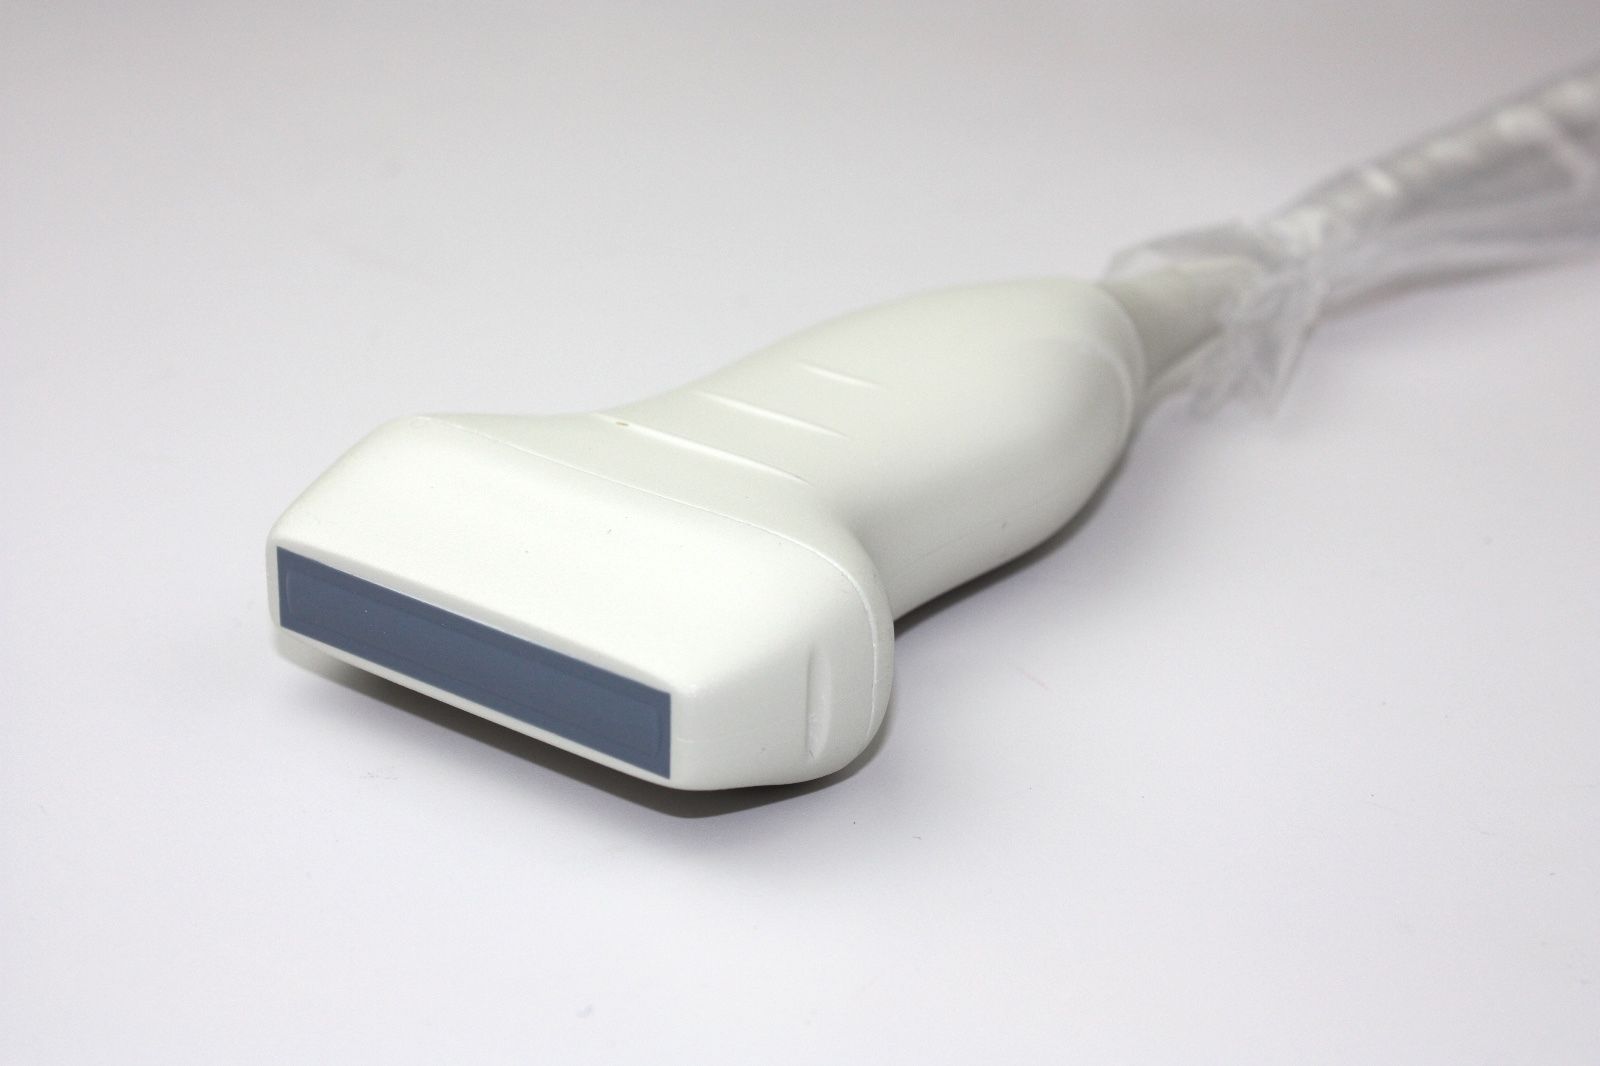 L11-4Ds Linear Probe (L40) 7.5MHz For BMV iuStar100vet or iSonoTouch Ultrasound DIAGNOSTIC ULTRASOUND MACHINES FOR SALE